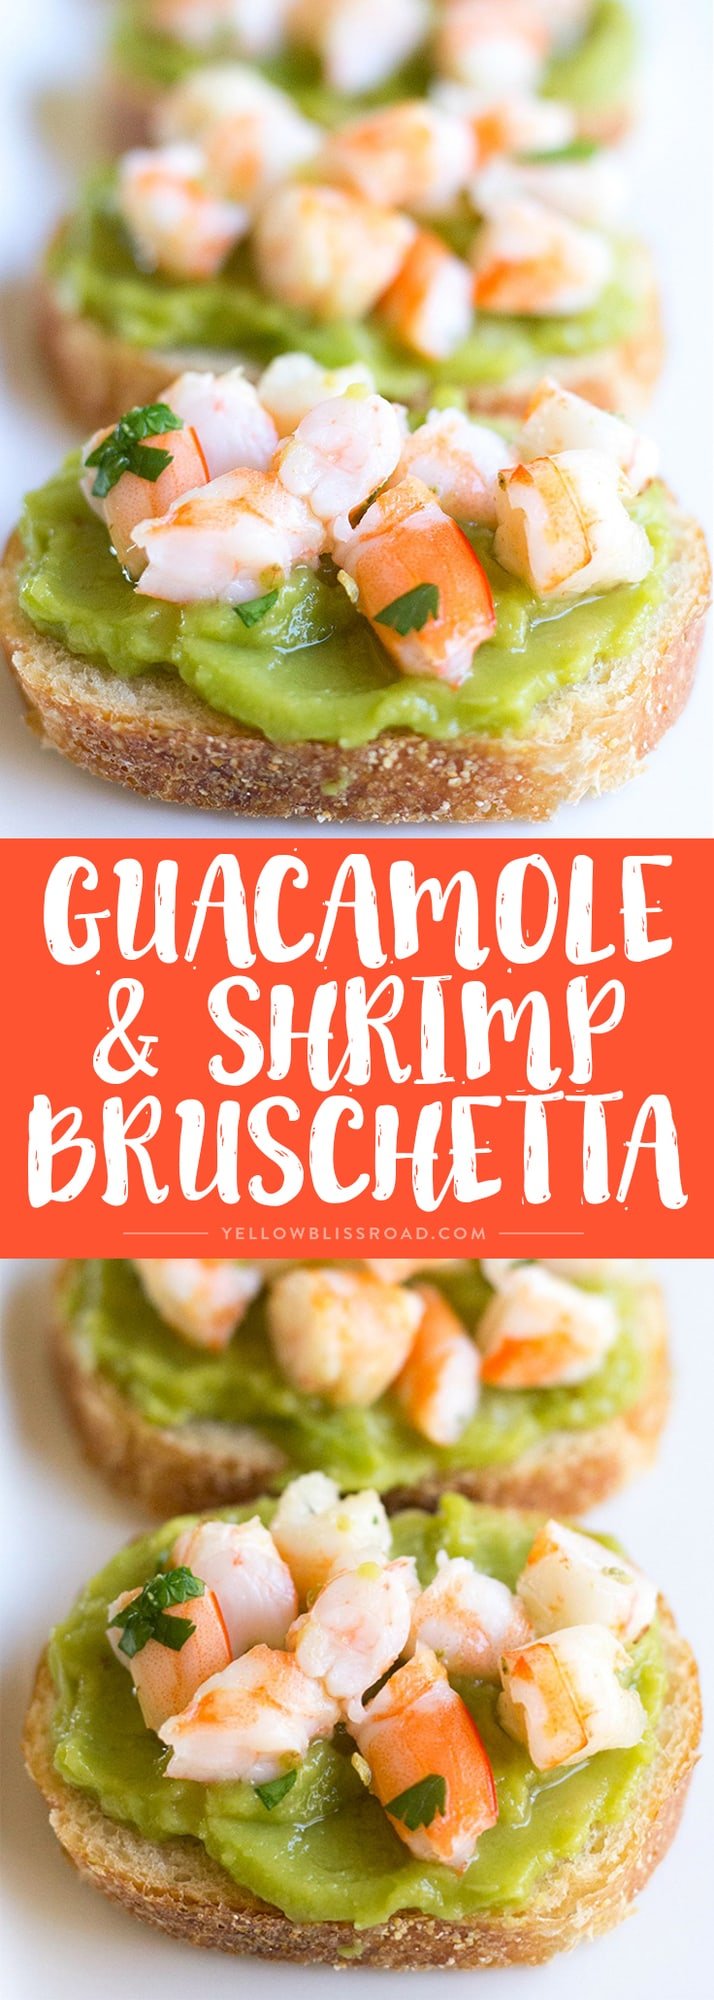 Guacamole Shrimp Bruschetta is an easy, 10-minute appetizer that's full of flavor and perfect for parties and Cinco de Mayo!